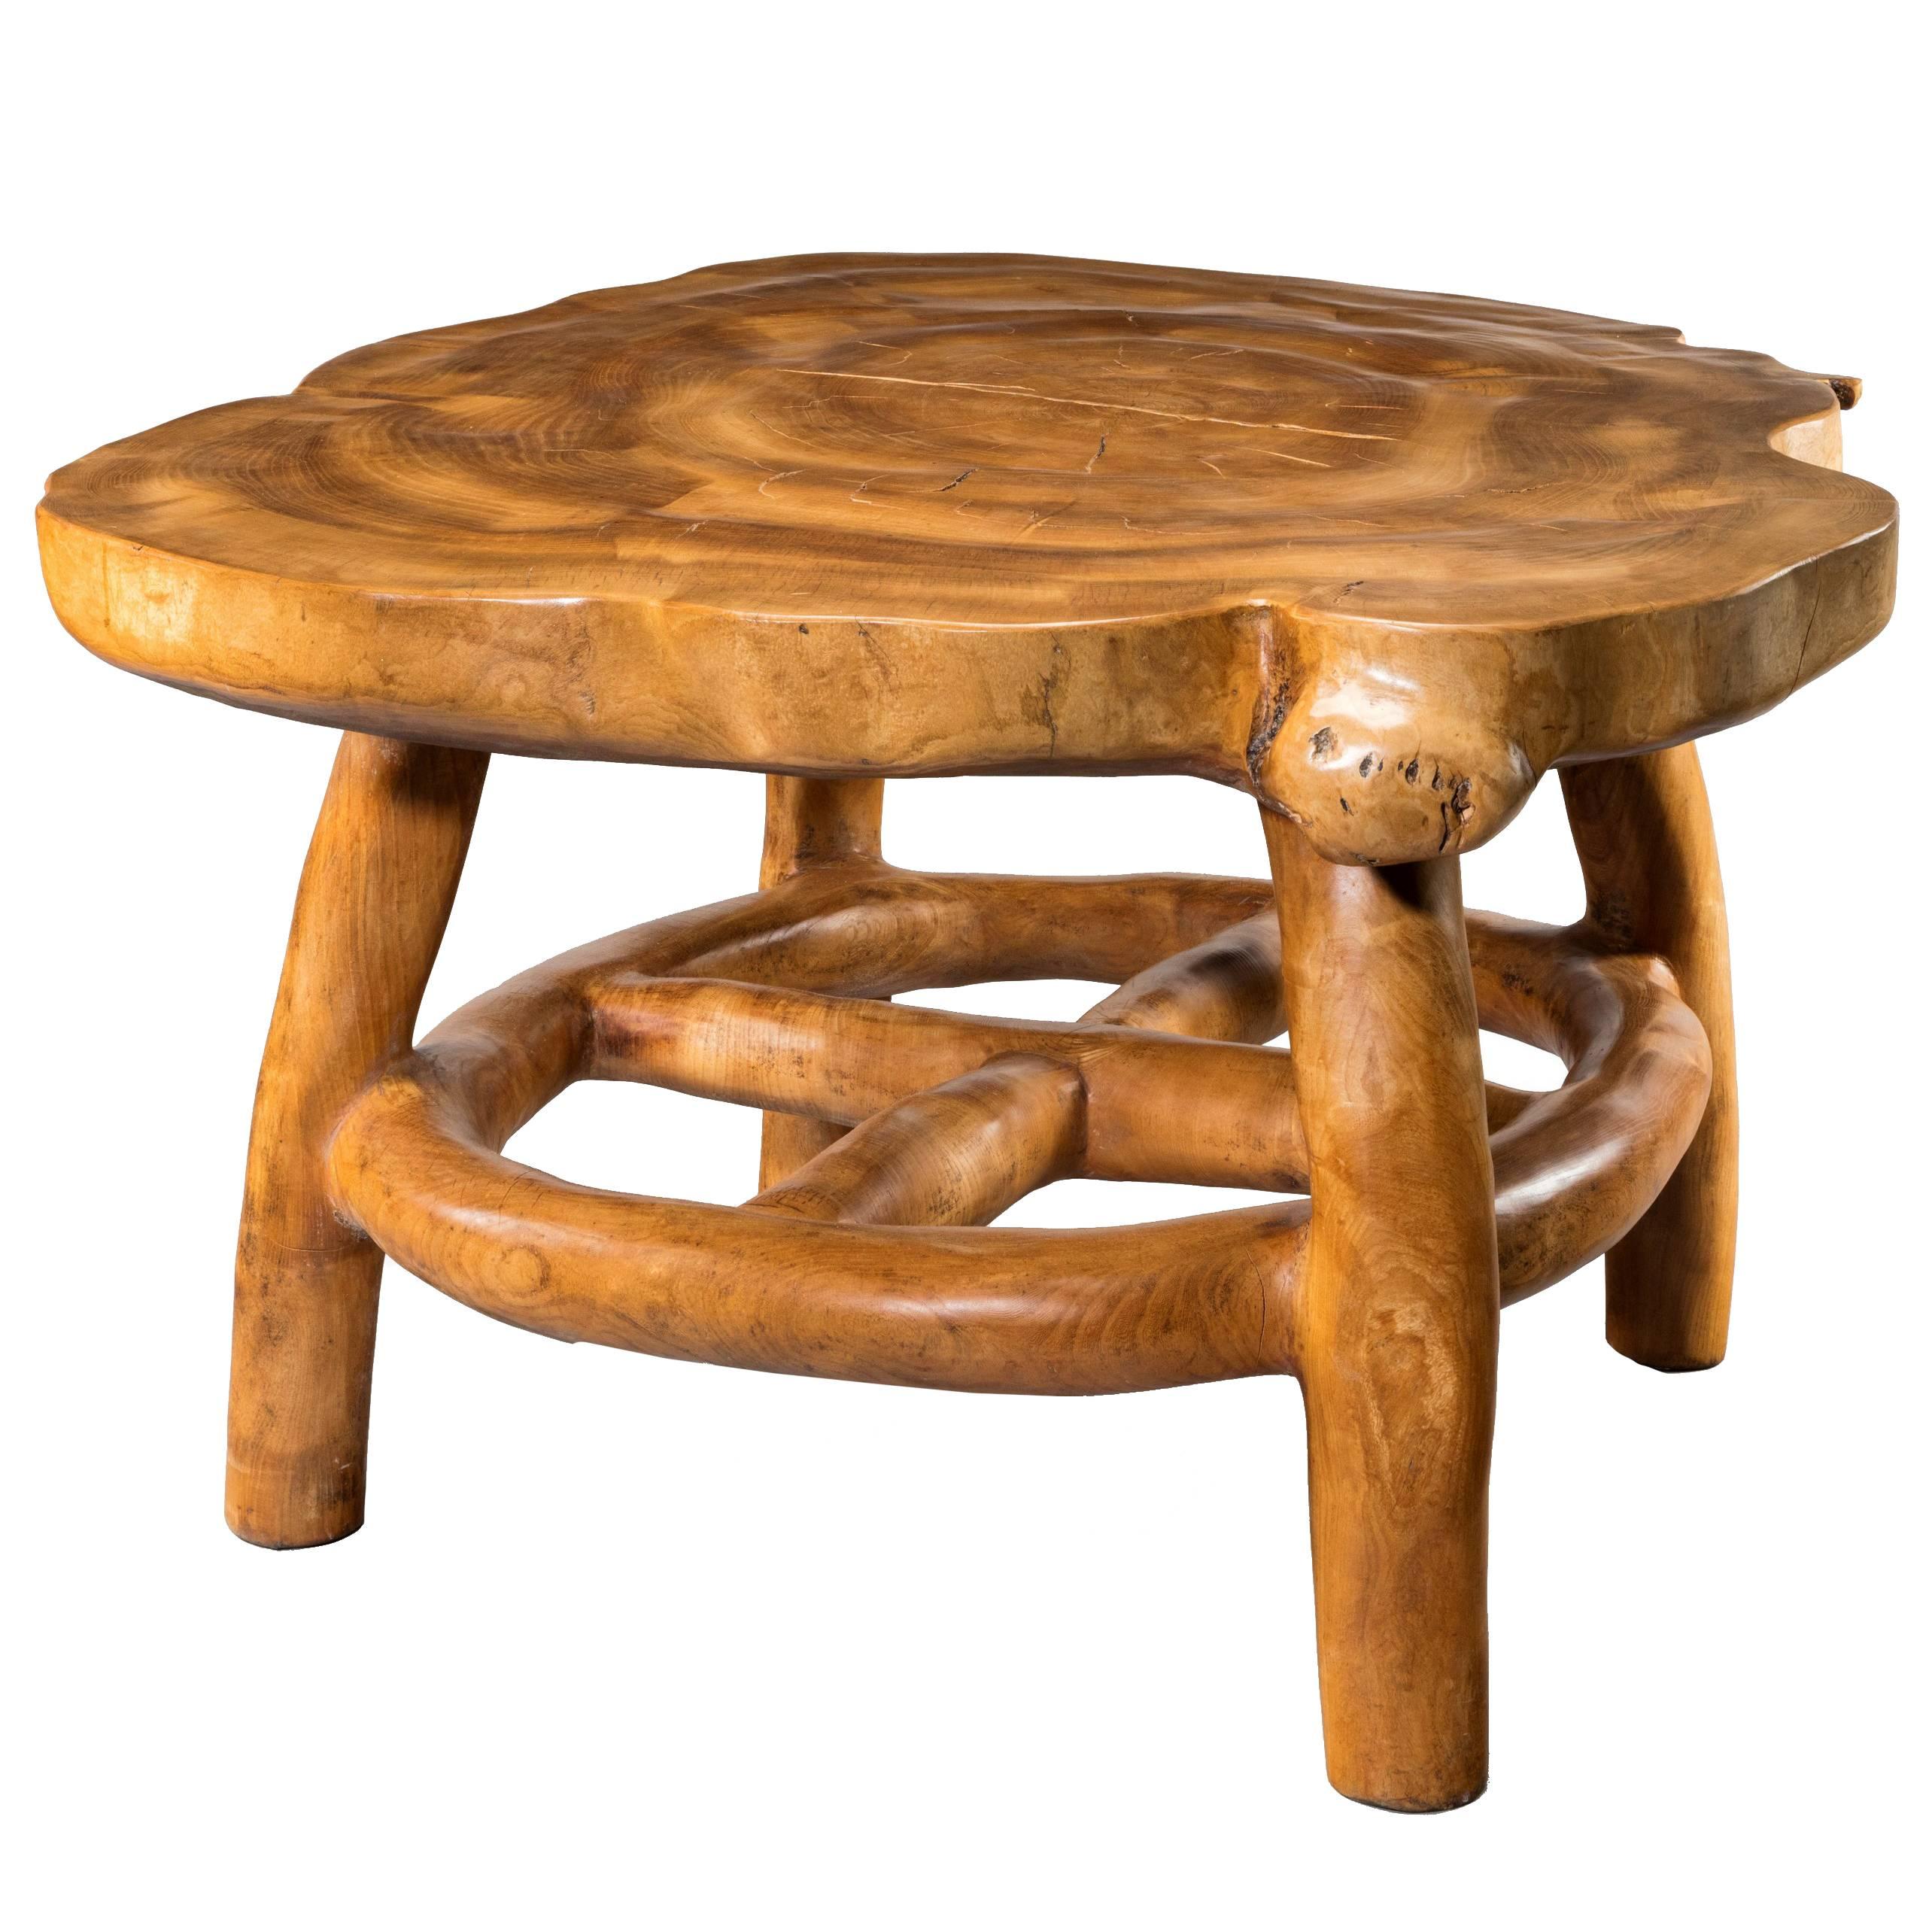 Centre Table by Maxie Lane